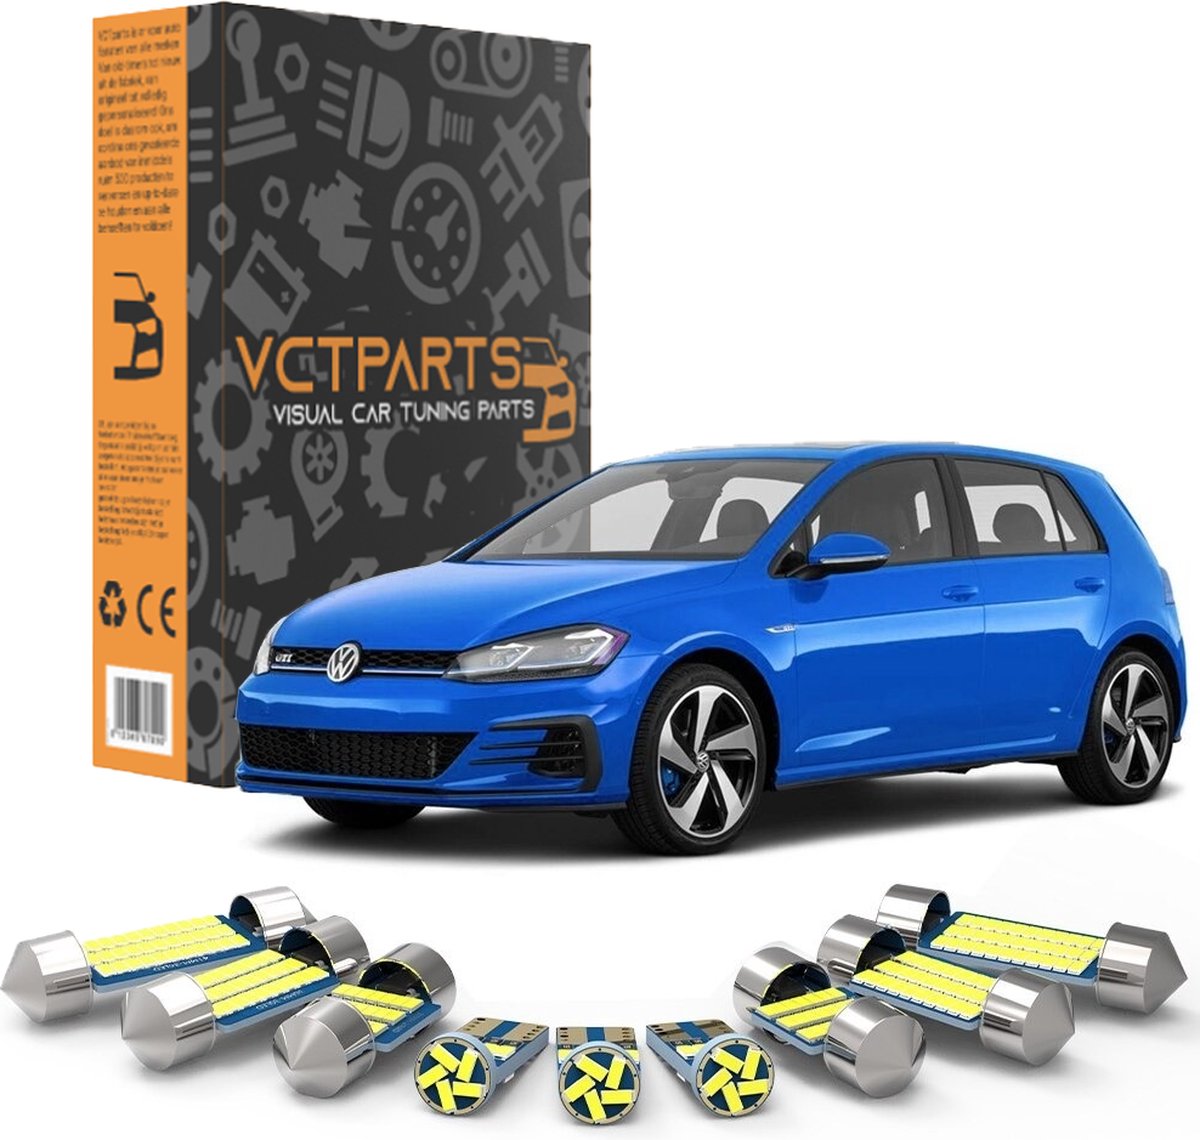 VCTparts Volkswagen Golf 7 Interieur Verlichting Canbus led Wit 6000K